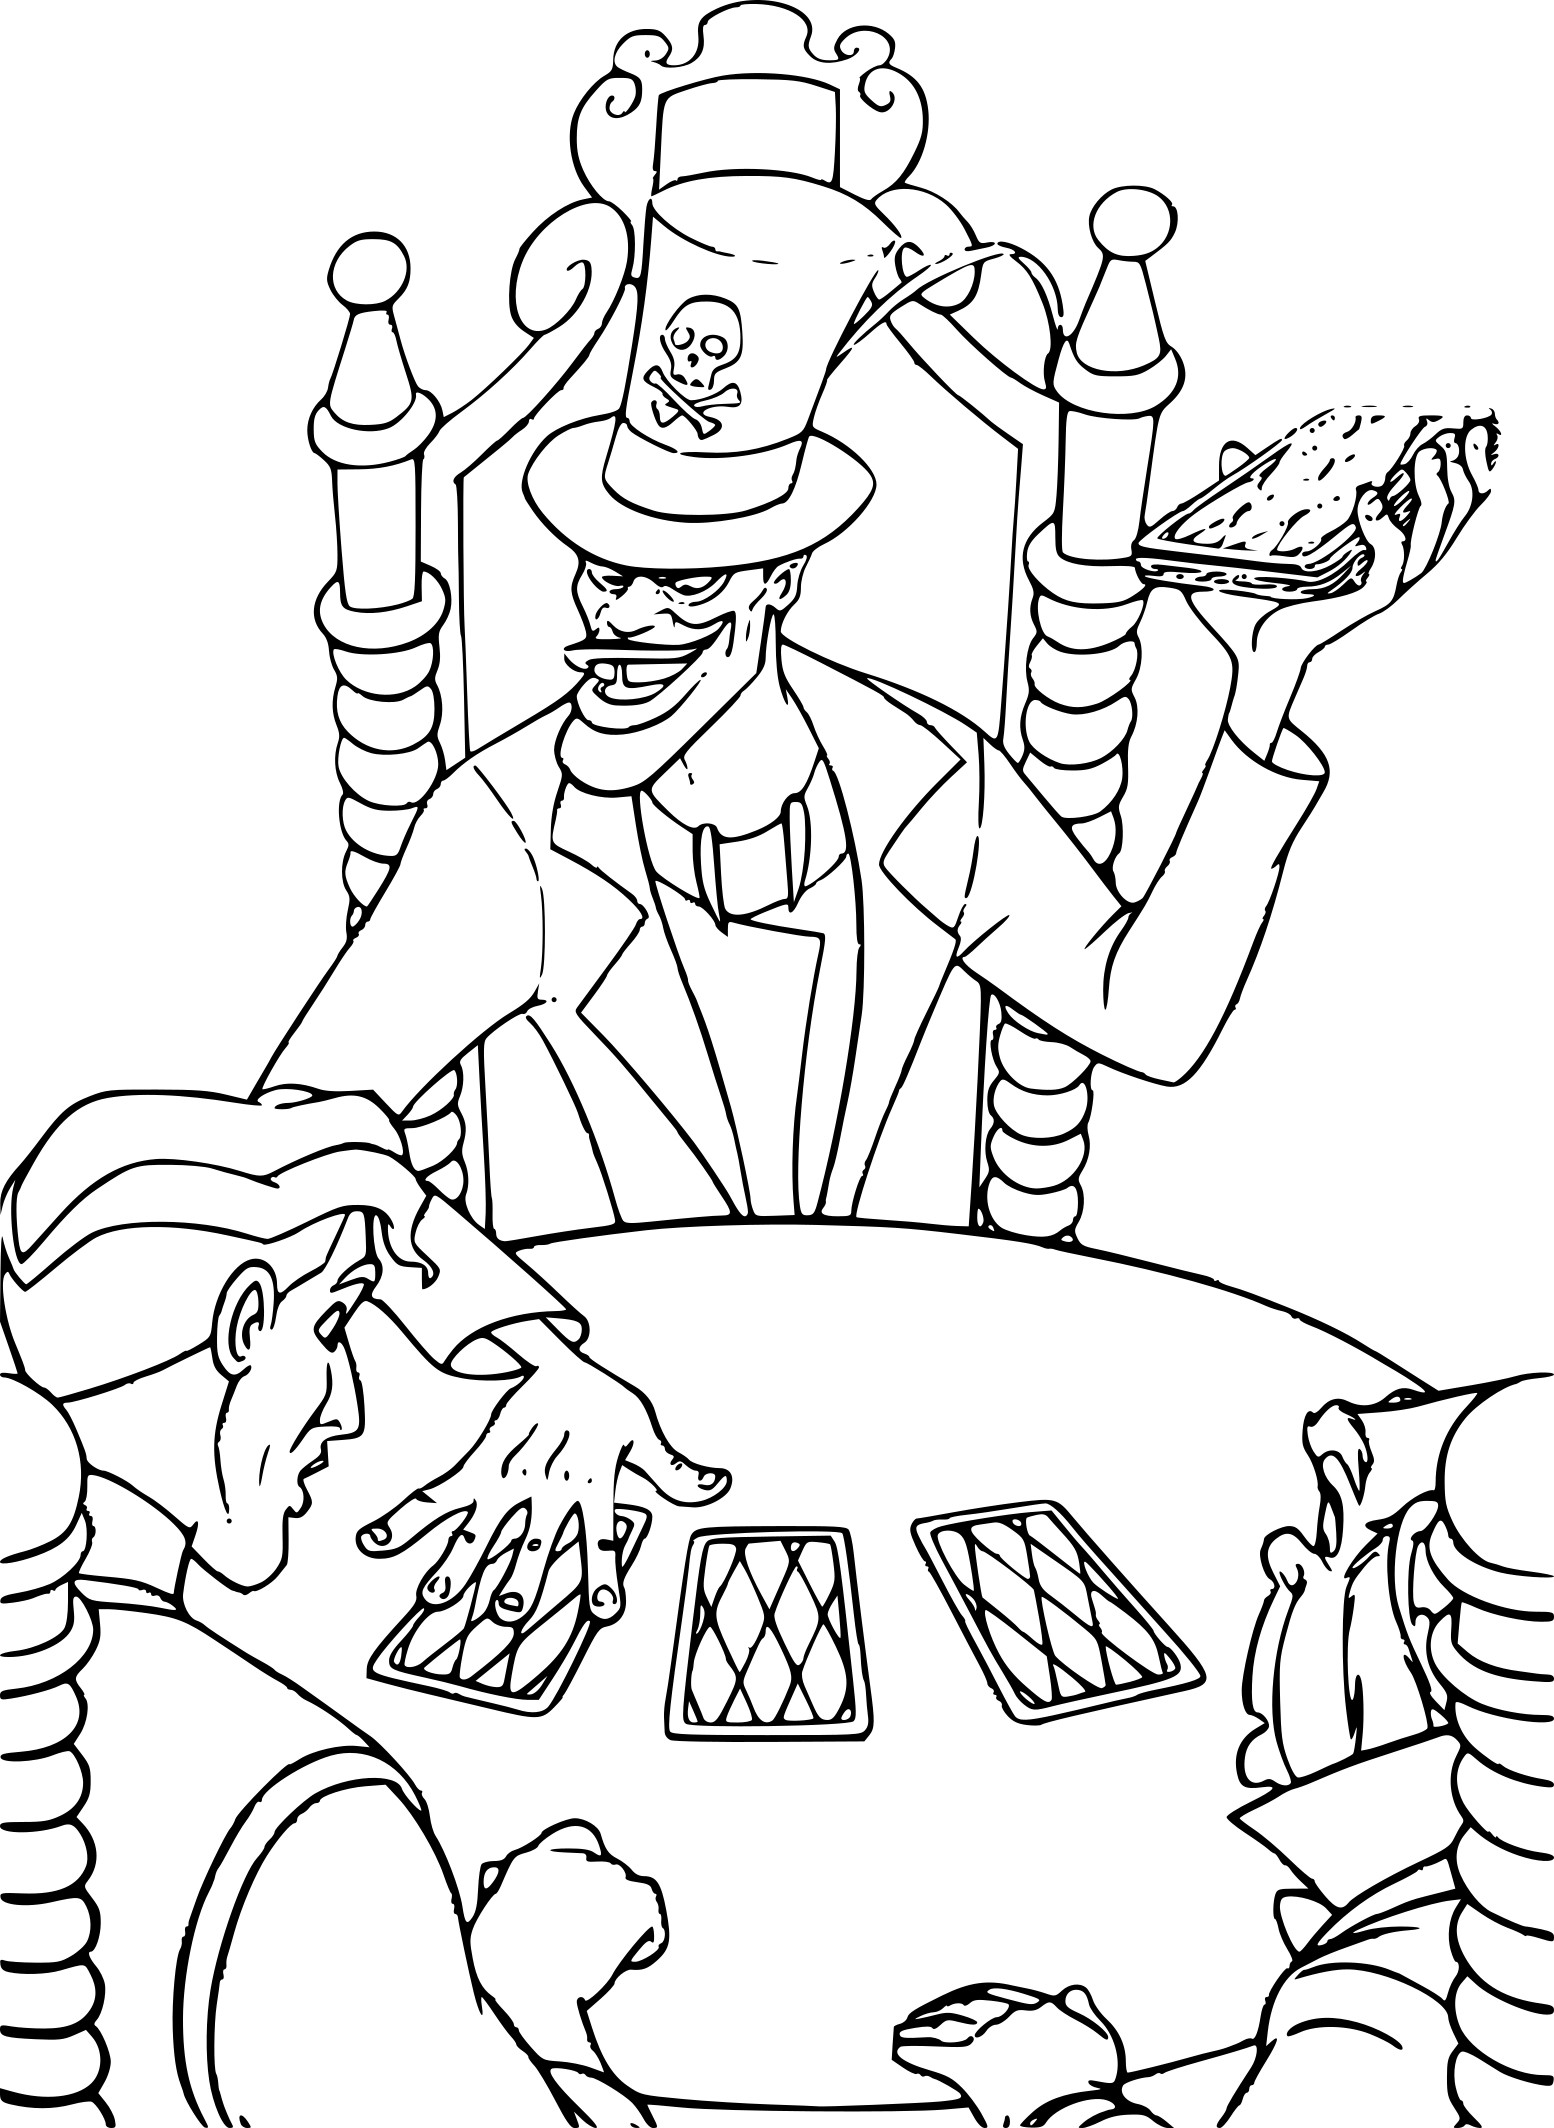 Doctor Facilier coloring page